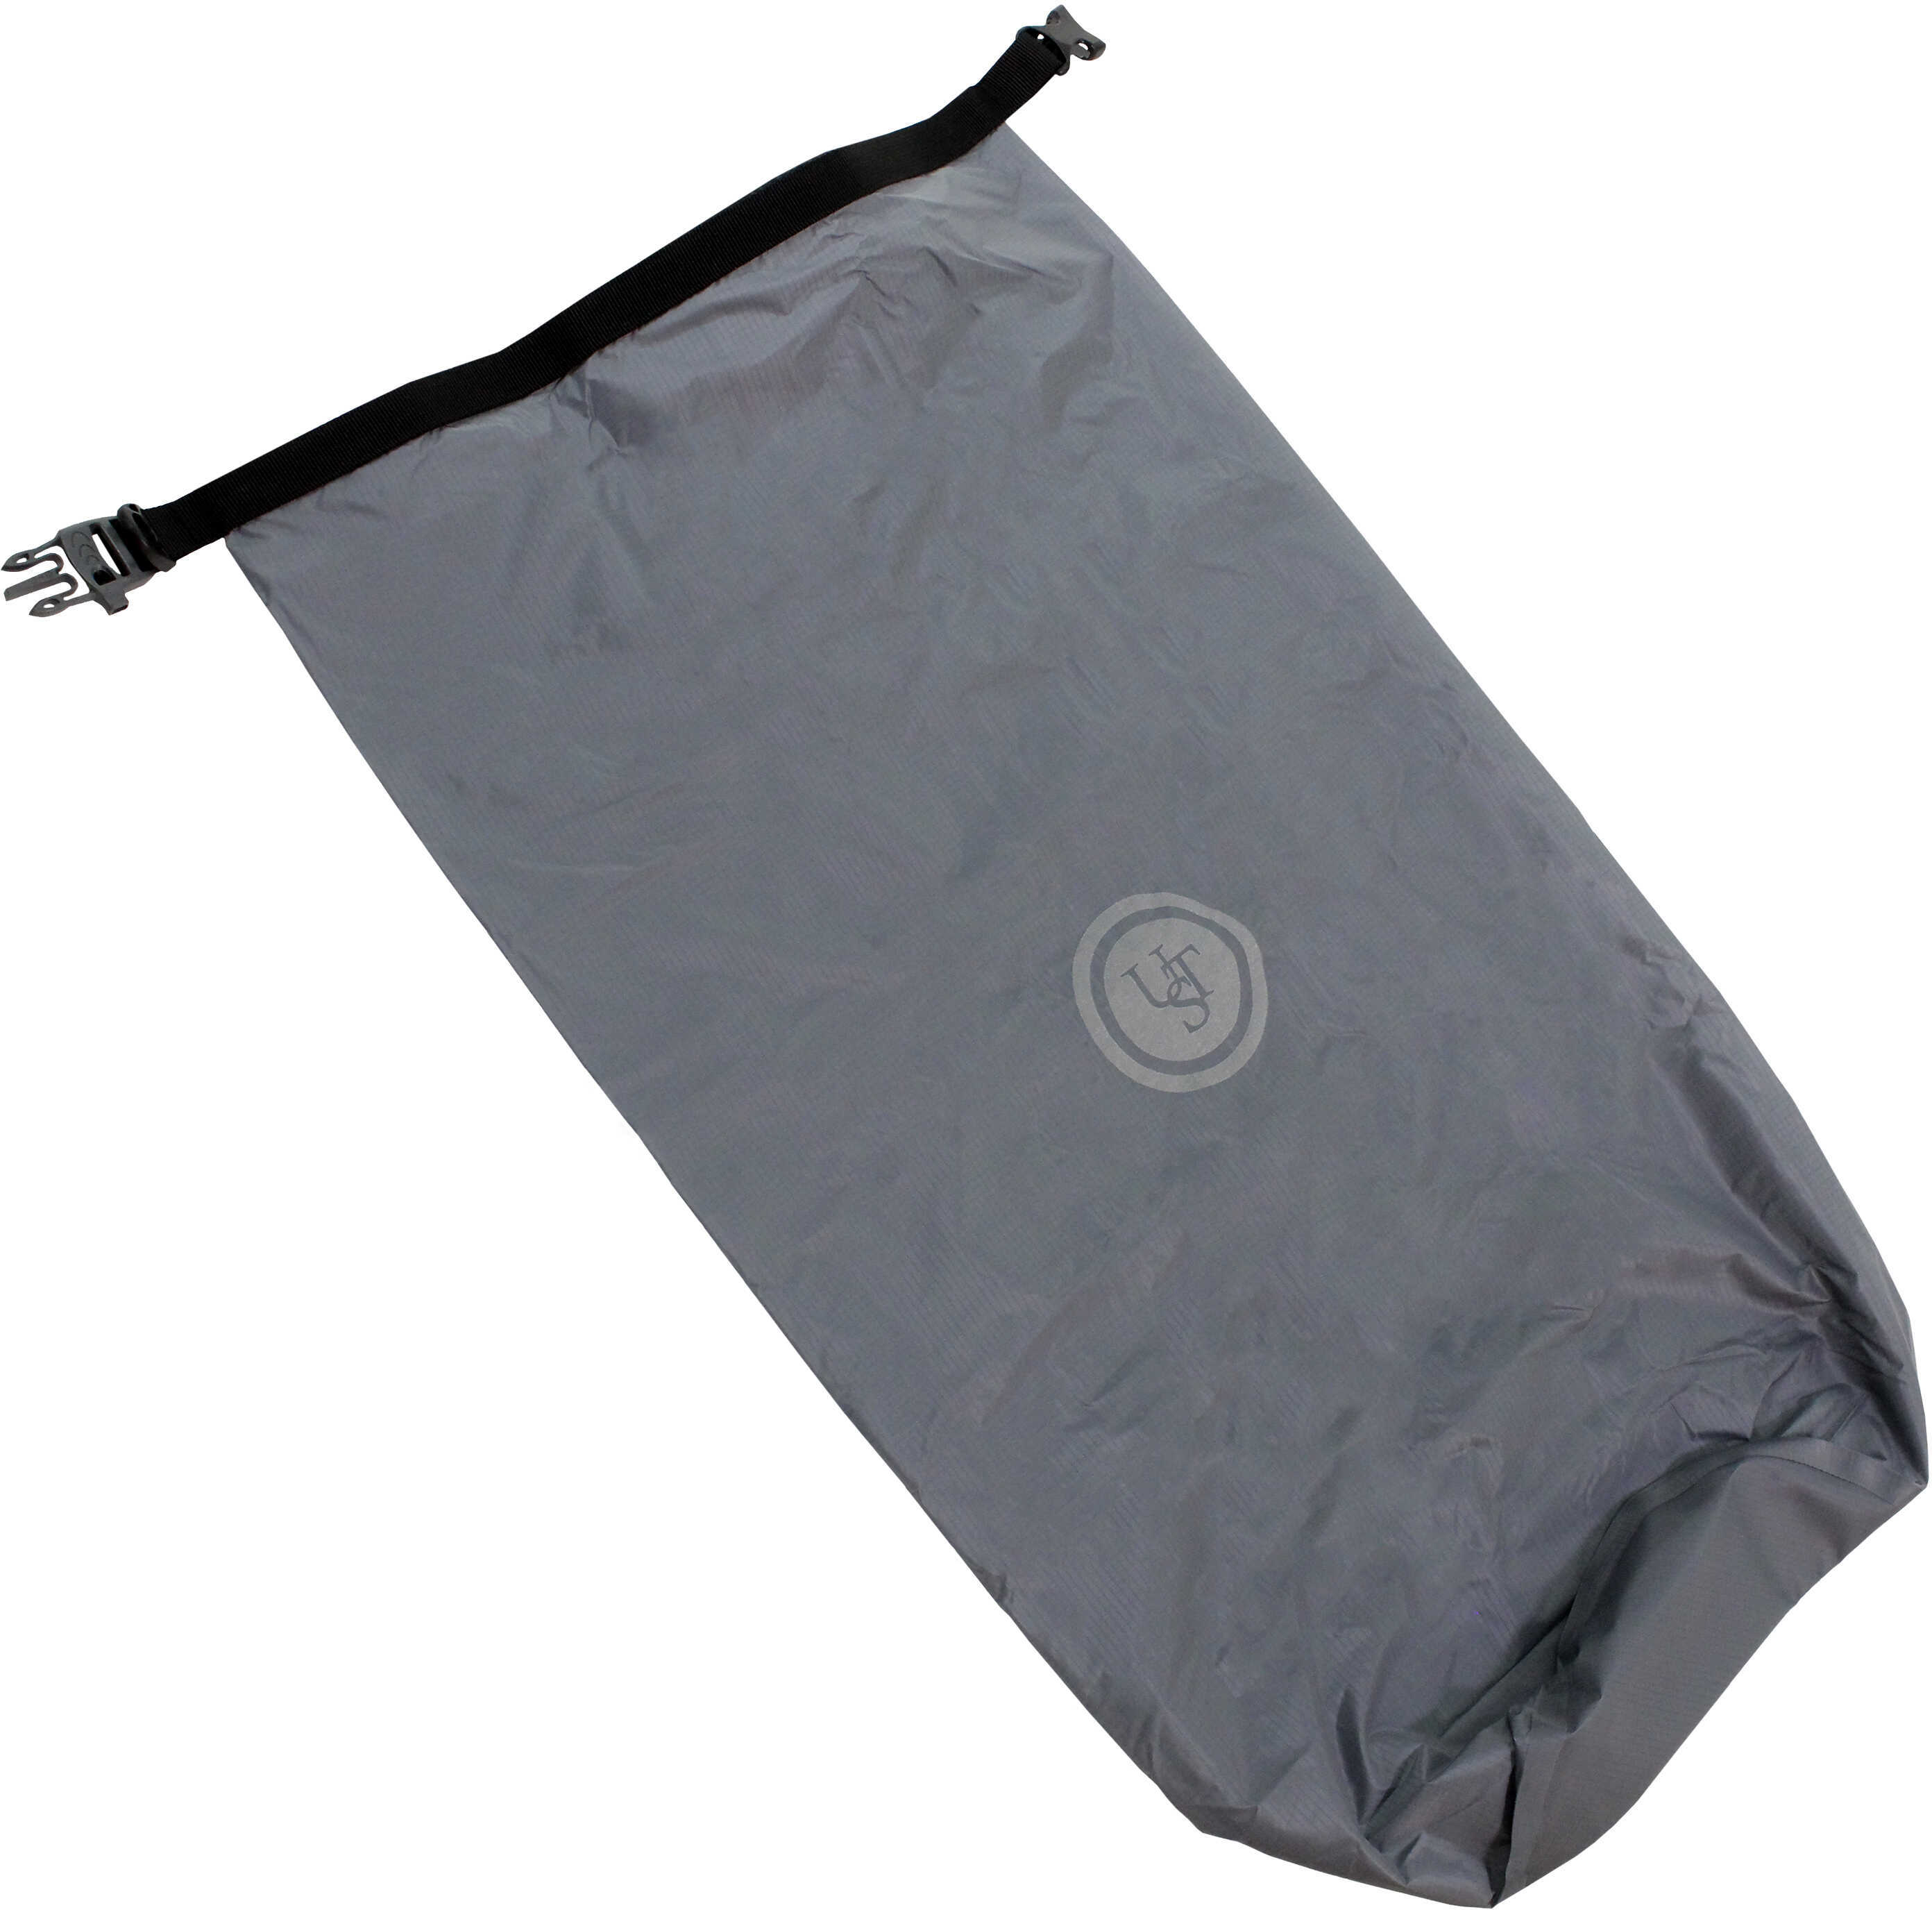 Ultimate Survival Technologies Safe and Dry Bag 25L, Gray Md: 20-12138